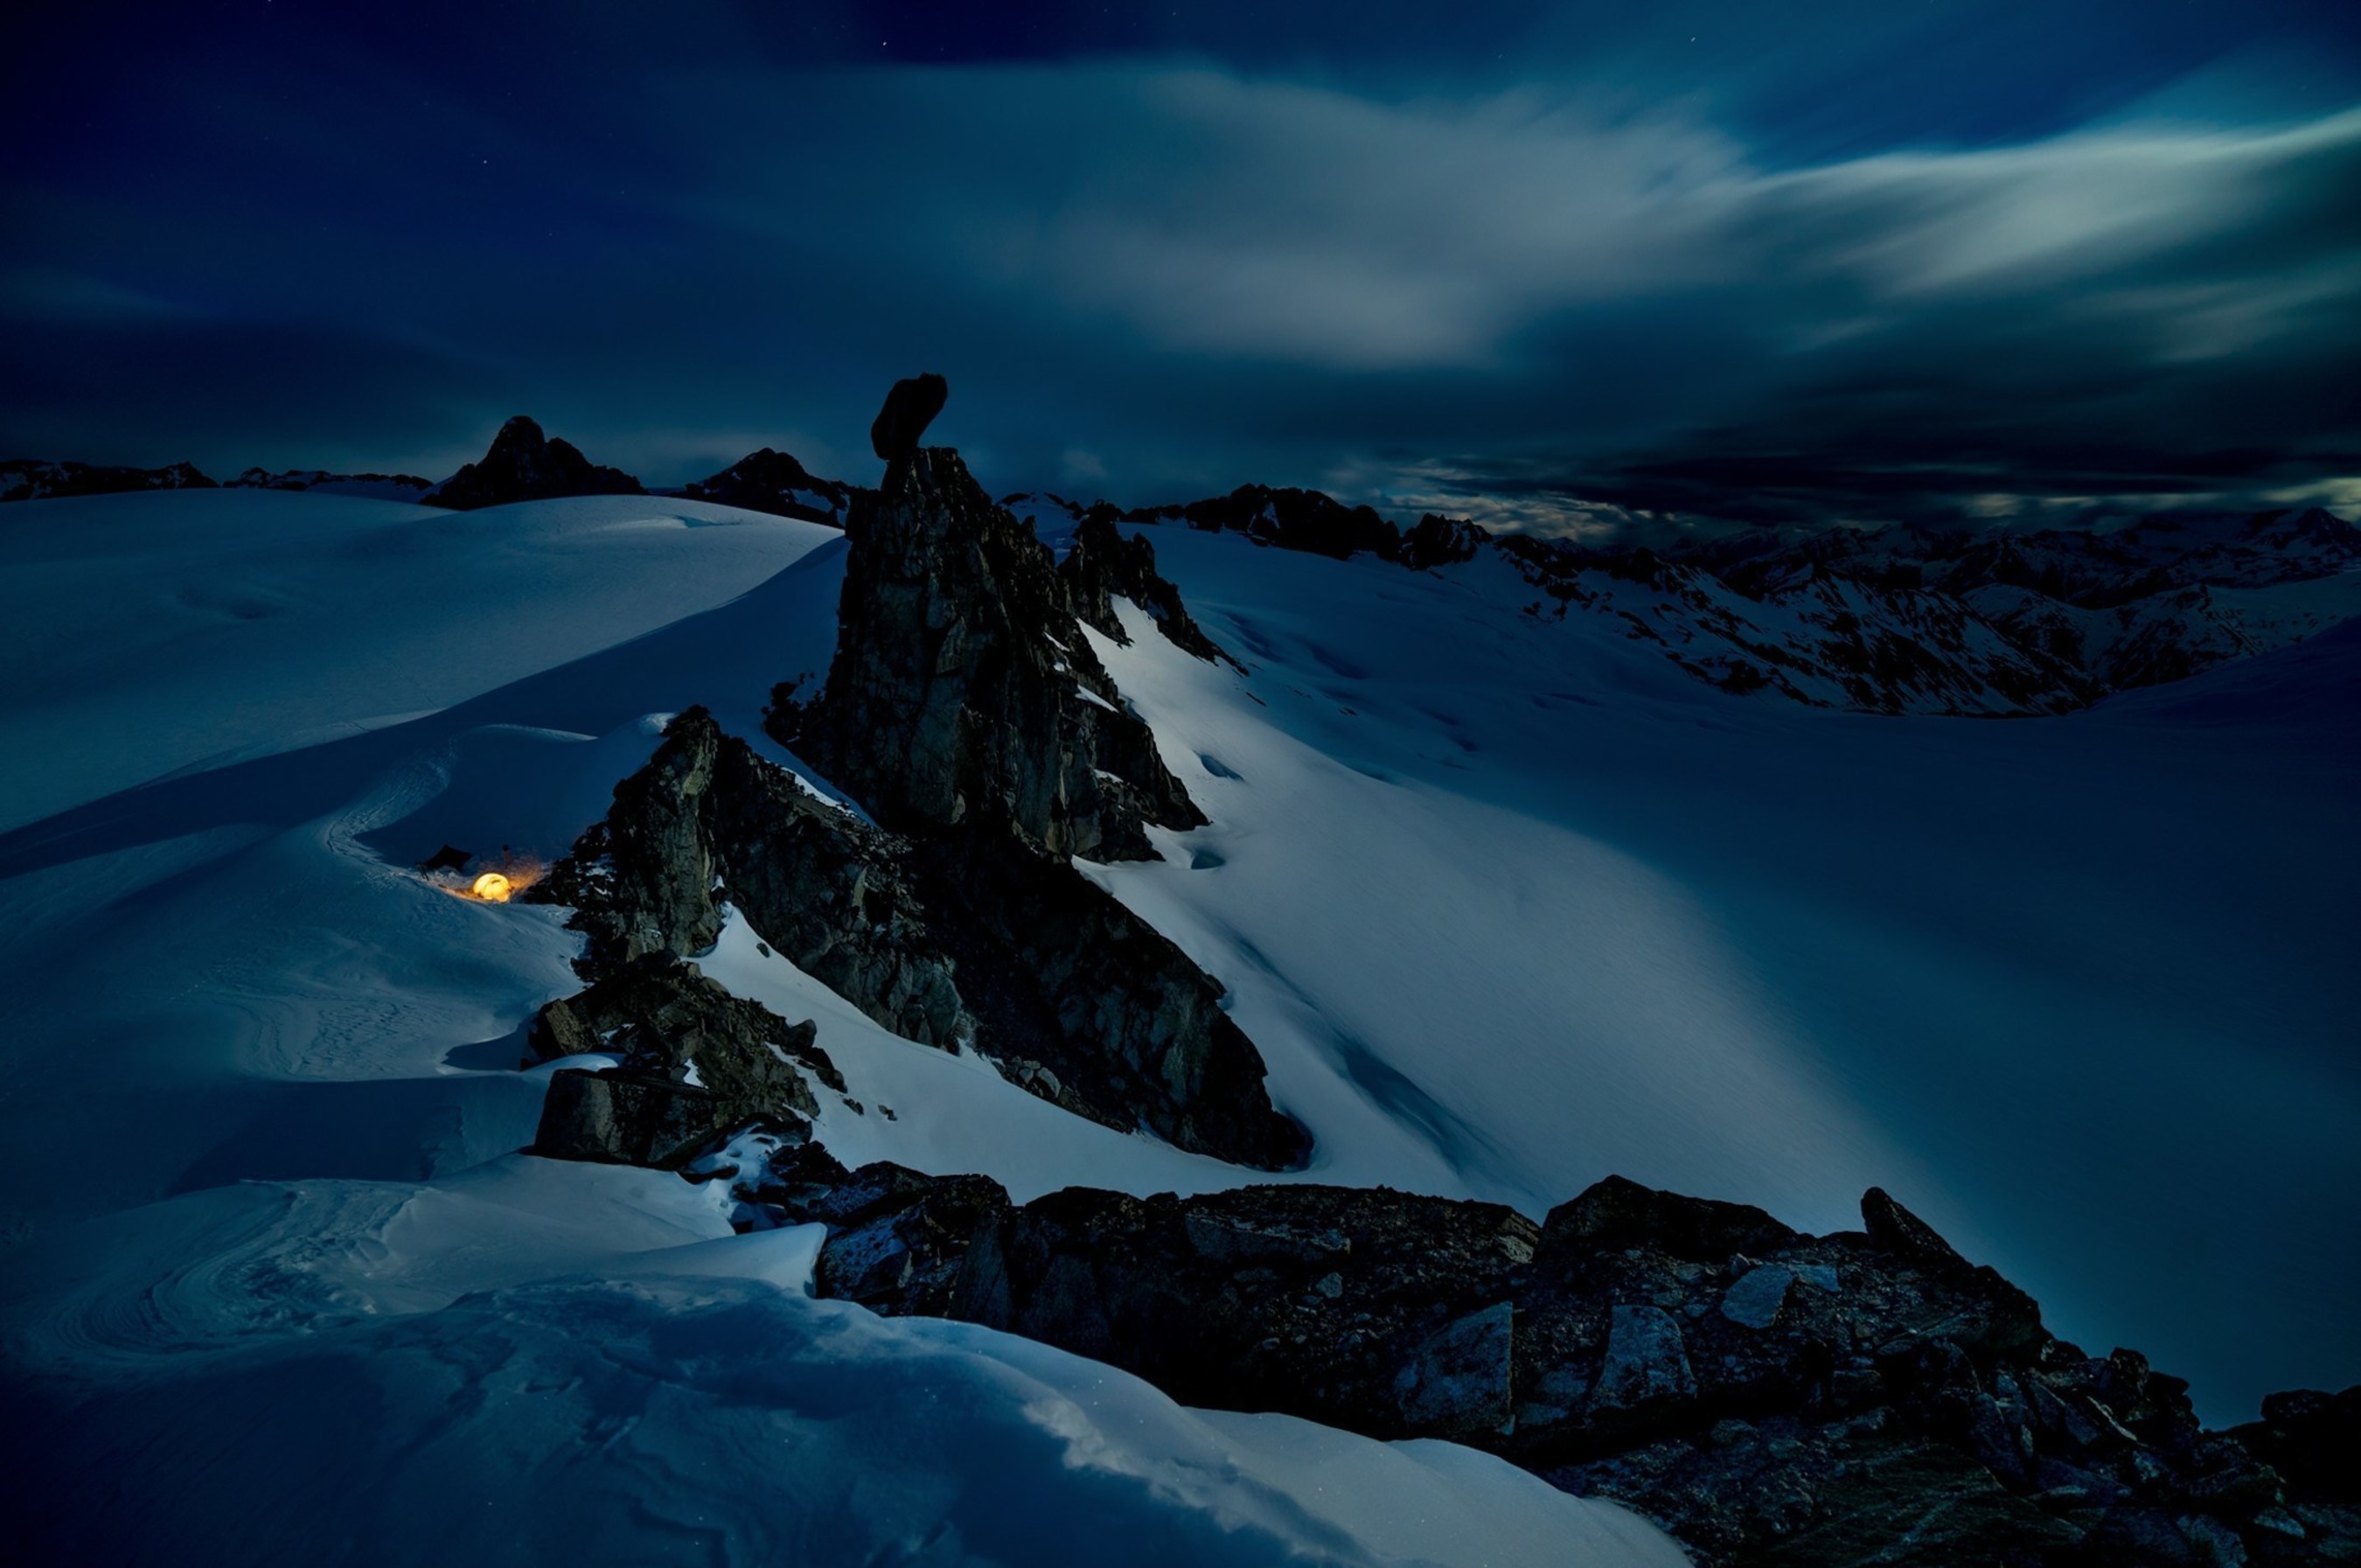 One of many windy, moonlit campsites on British Columbia's Homathko Icefield for the crew of A Skier's Journey (as seen in Crossing Home: A Skier's Journey).